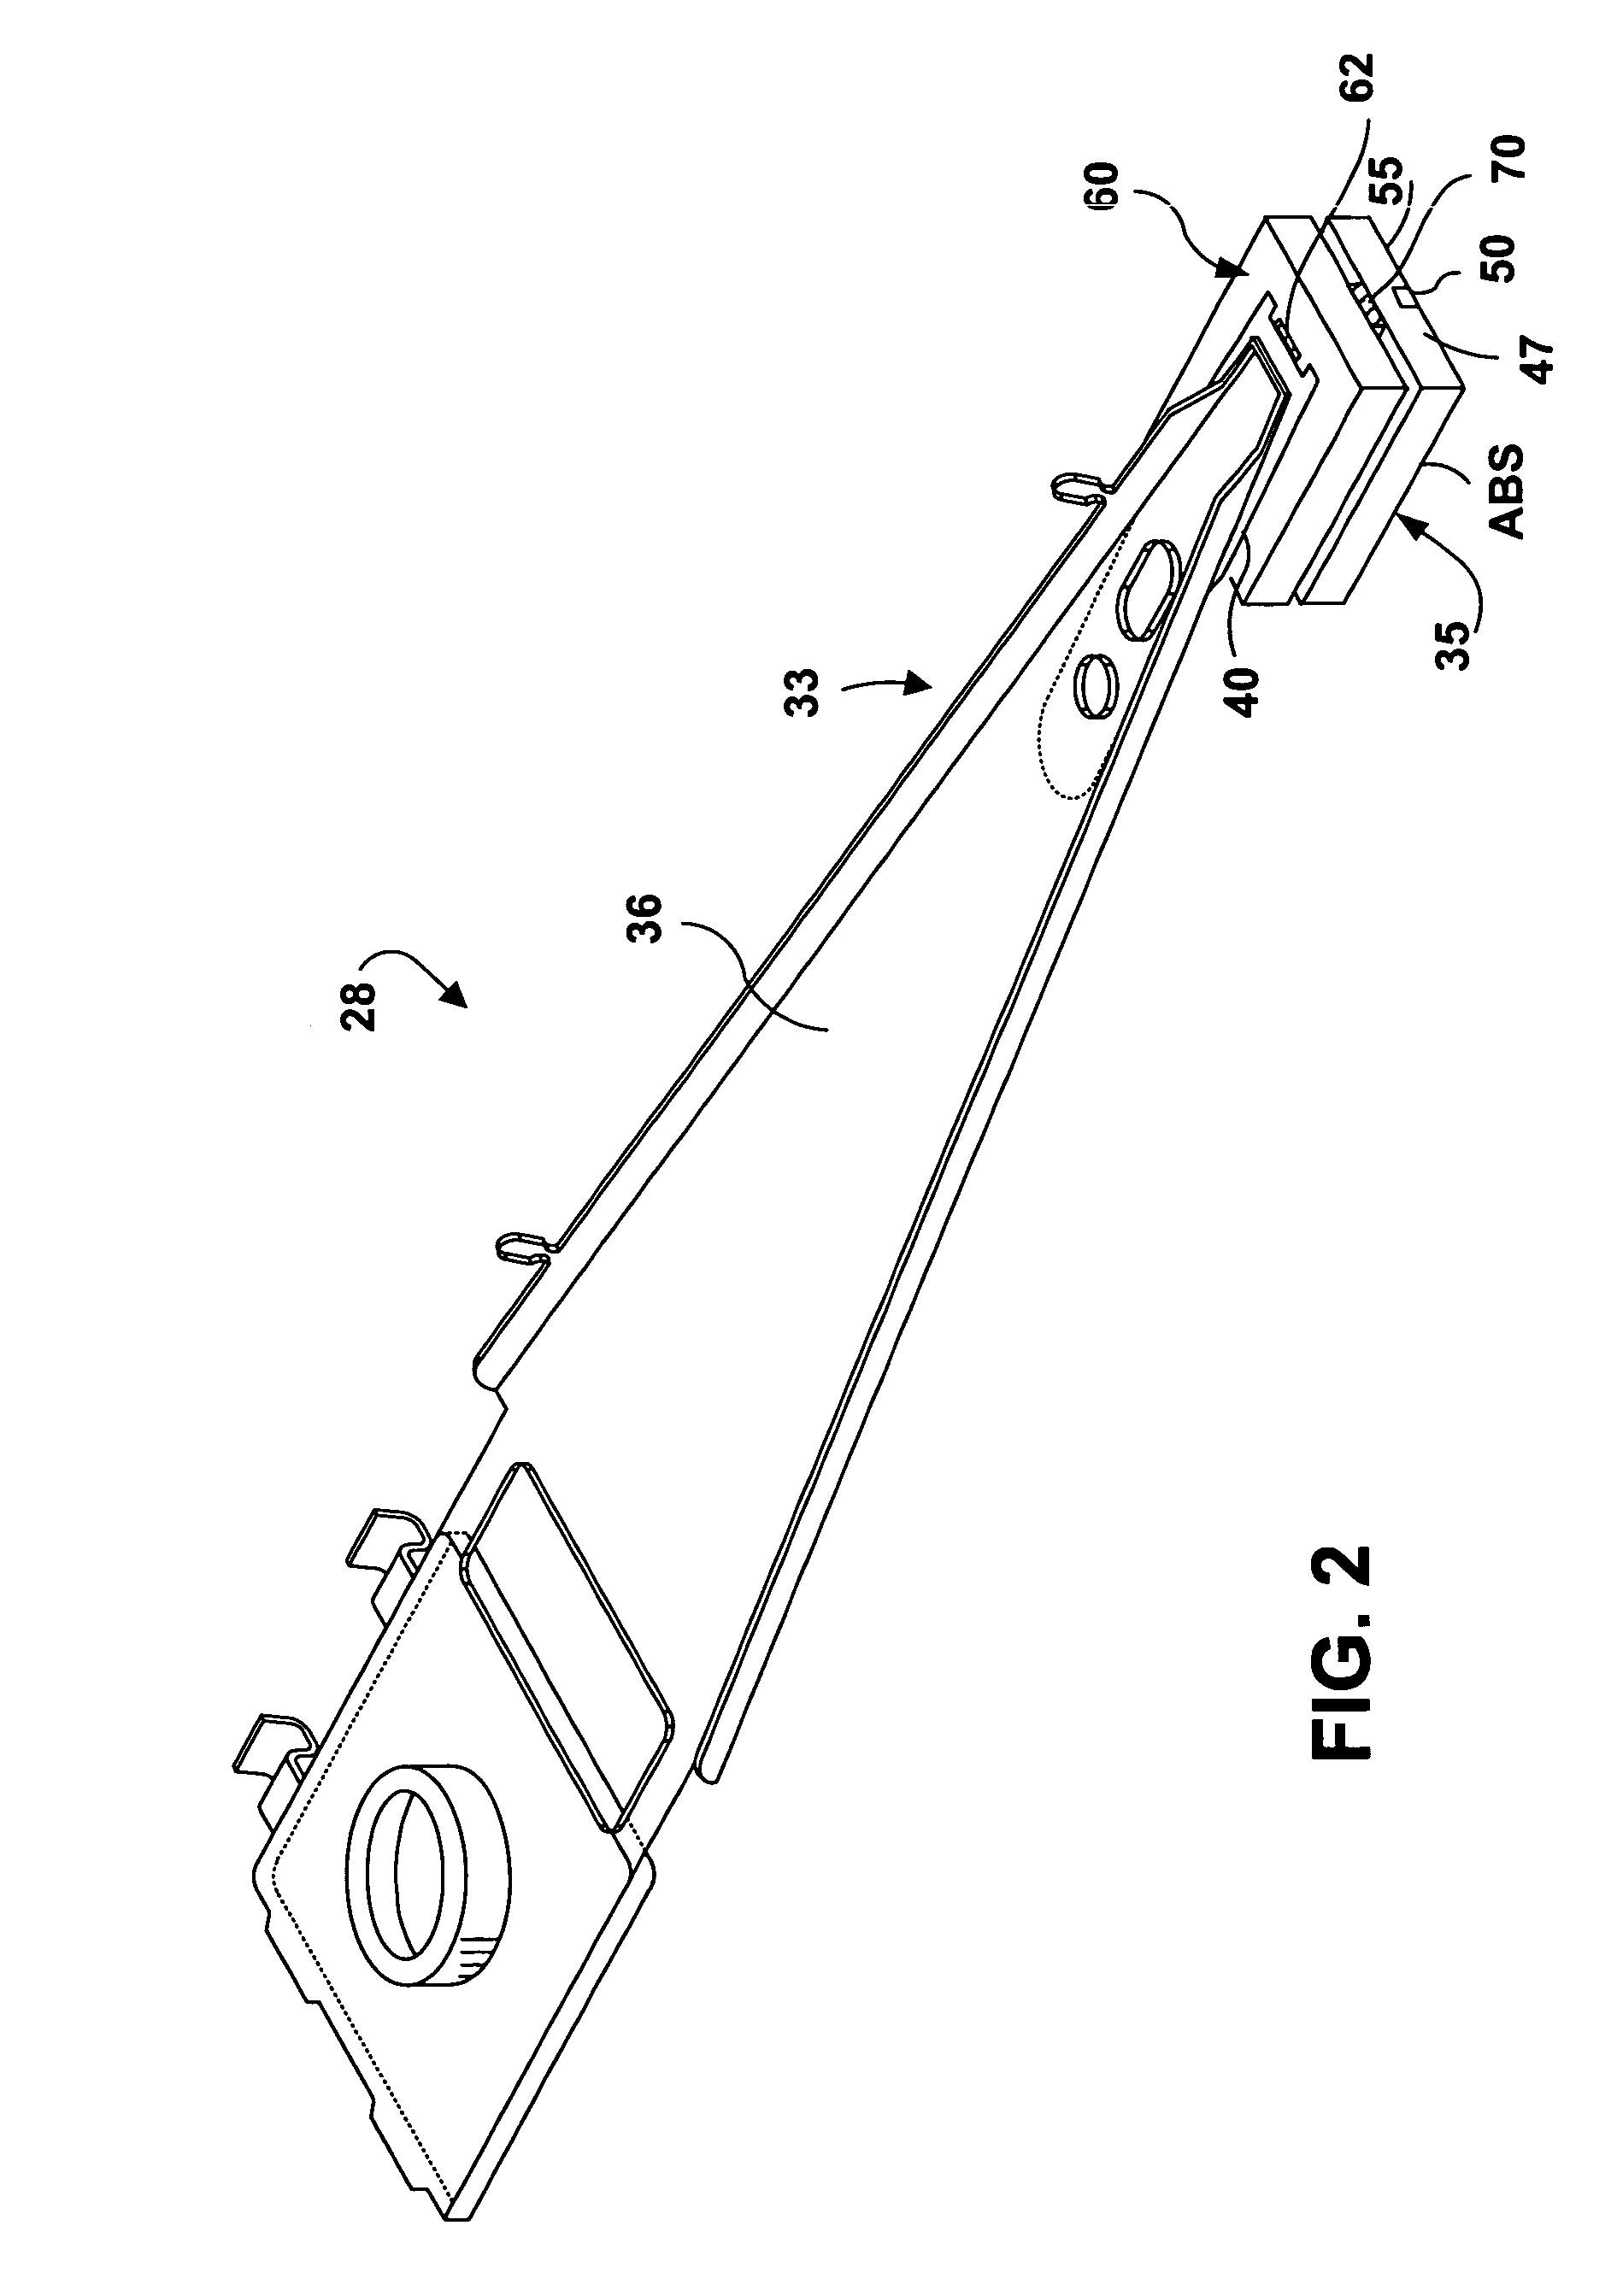 Dimple pivot post for a rotary co-located microactuator